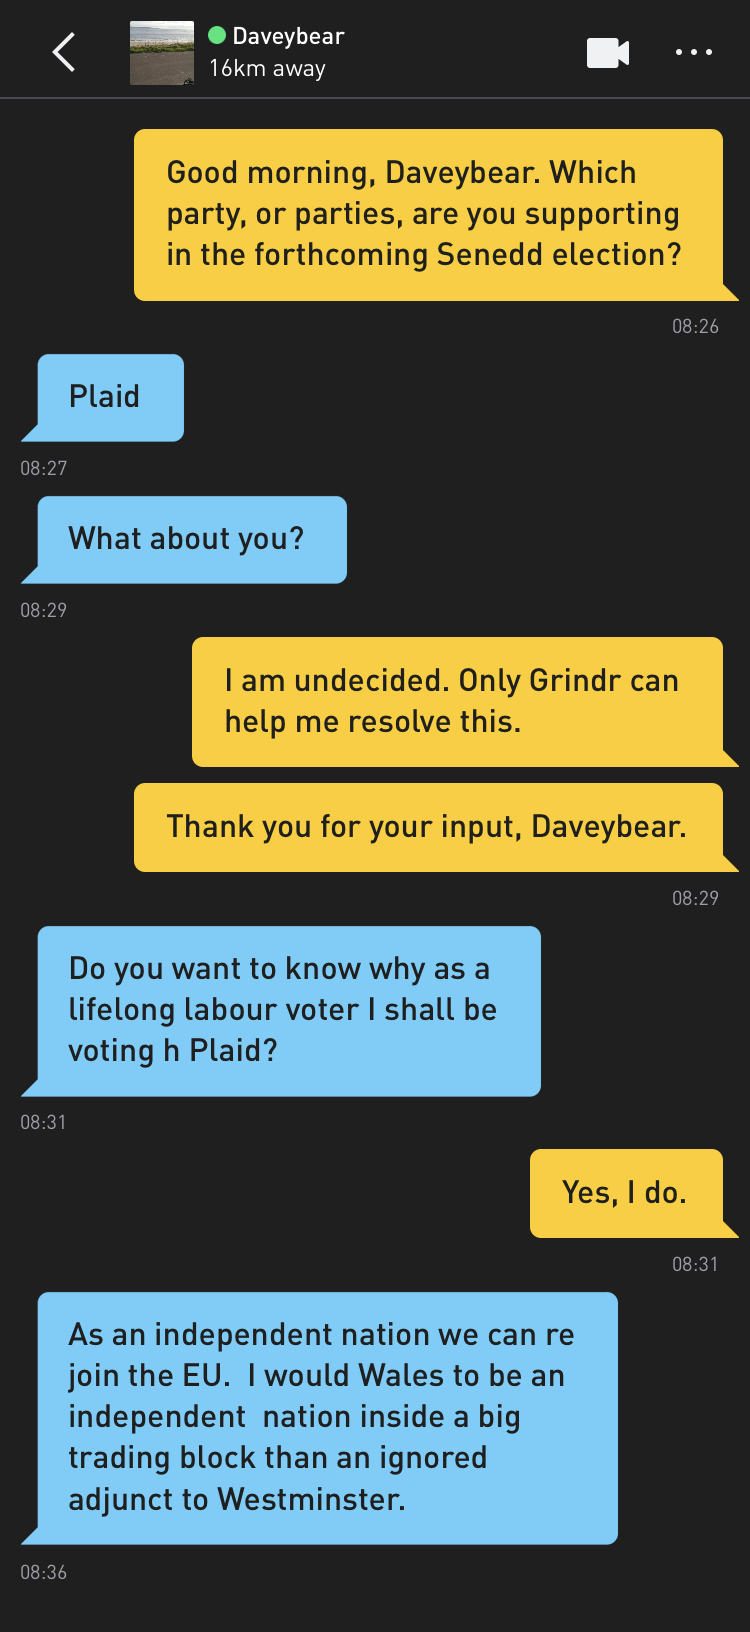 Me: Good morning, Daveybear. Which party, or parties, are you supporting in the forthcoming Senedd election? Daveybear: Plaid Daveybear: What about you? Me: I am undecided. Only Grindr can help me resolve this. Me: Thank you for your input, Daveybear. Daveybear: Do you want to know why as a lifelong labour voter I shall be voting h Plaid? Me: Yes, I do. Daveybear: As an independent nation we can re join the EU. I would Wales to be an independent nation inside a big trading block than an ignored adjunct to Westminster.